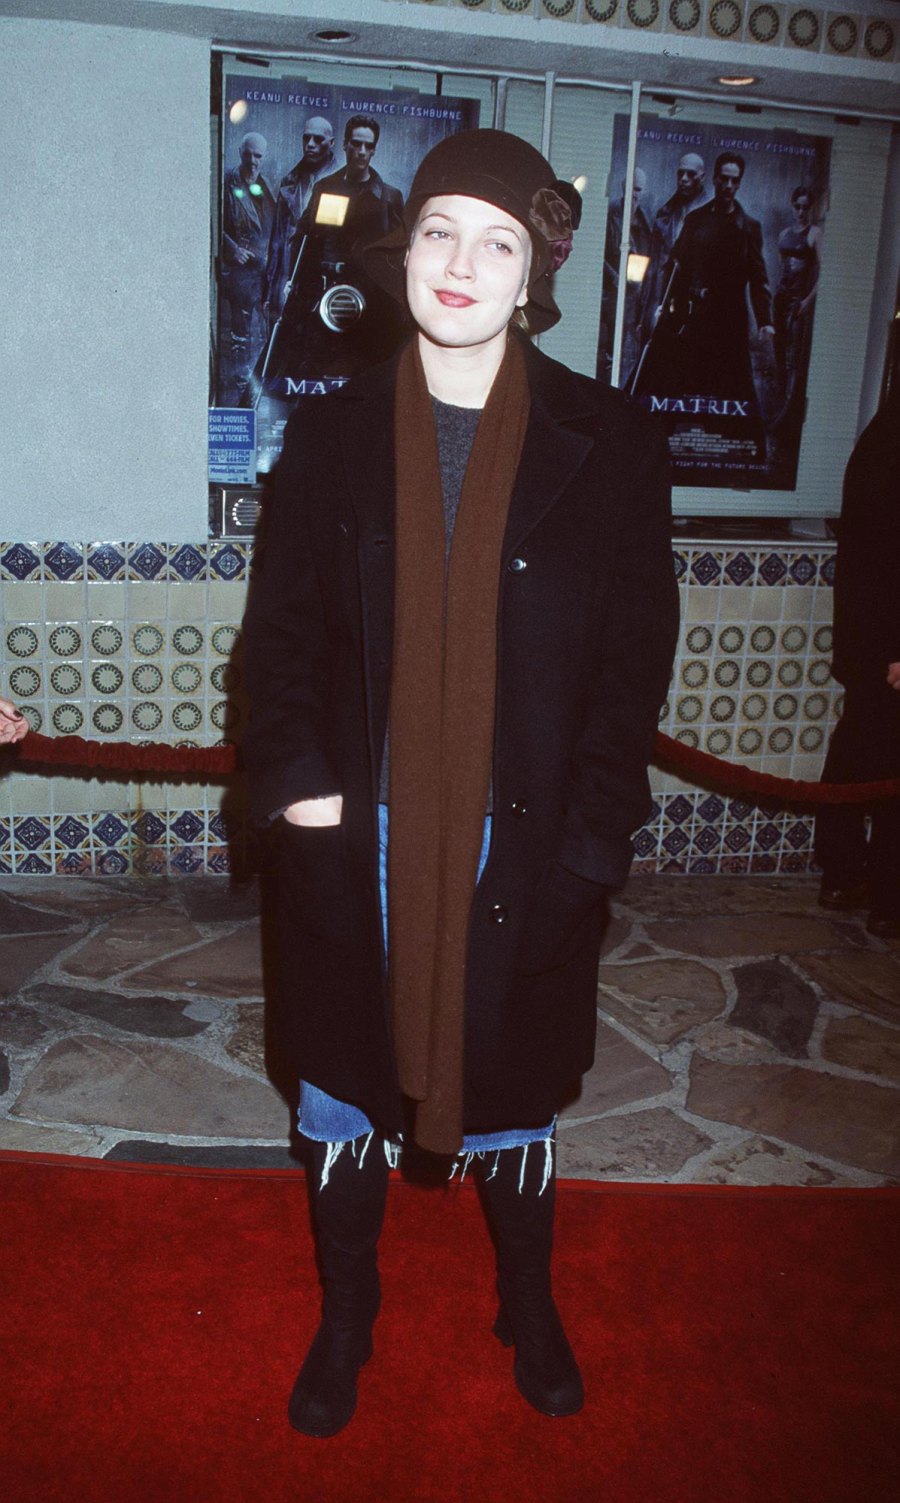 TK Wild Photos From The Matrix Premiere in 1999 492